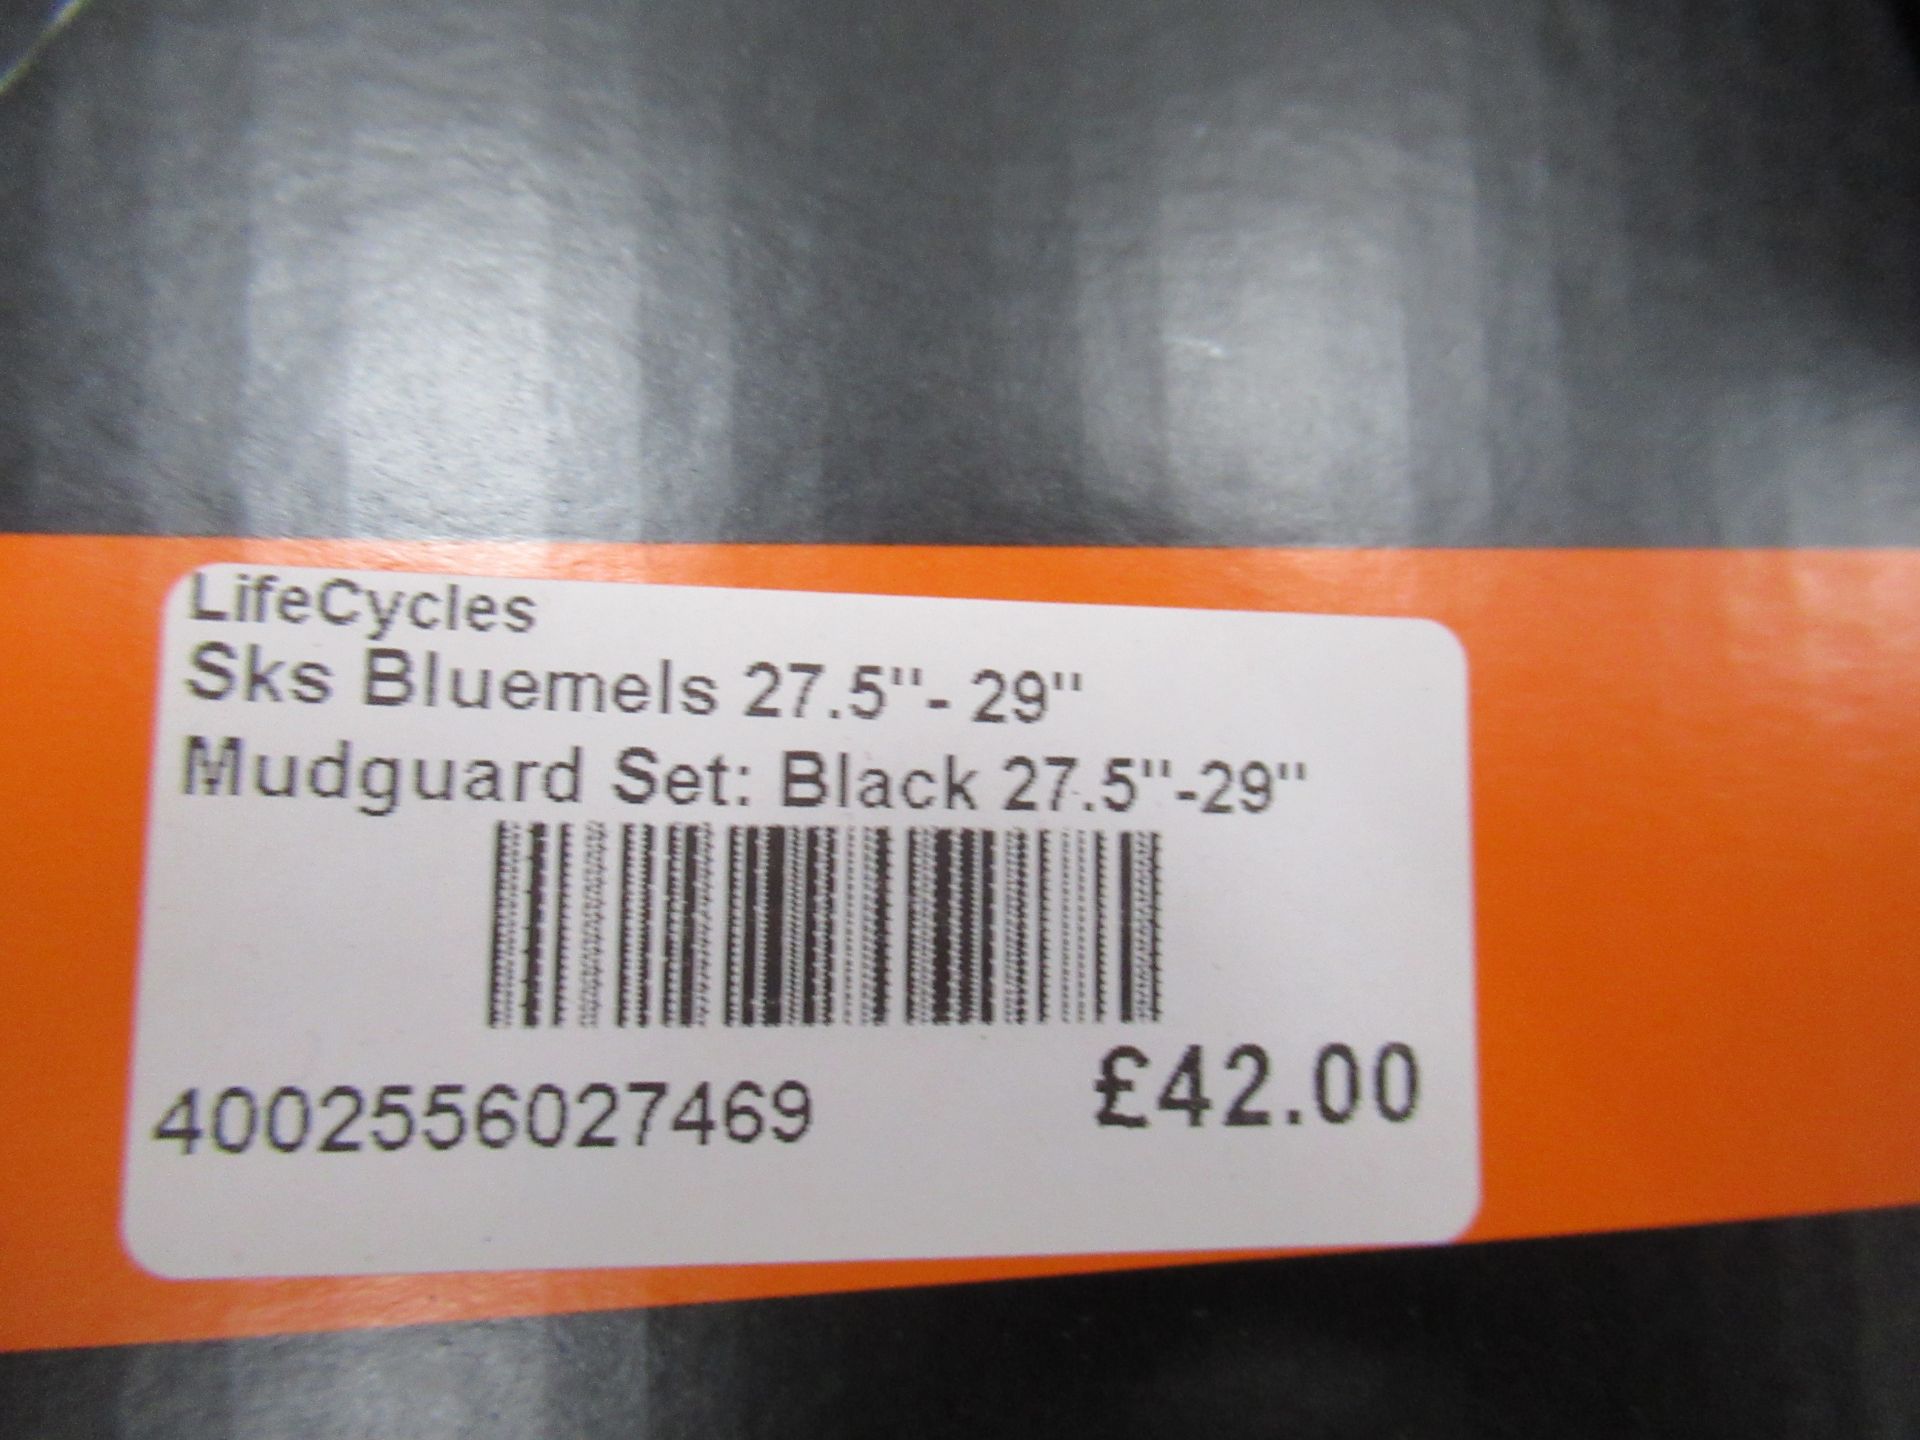 3 x SKS Bluemels 27.5 - 29" Mudguard sets - 1 x Glossy (RRP£42); 2 x Matte (£RRP£55 each) - Image 3 of 7